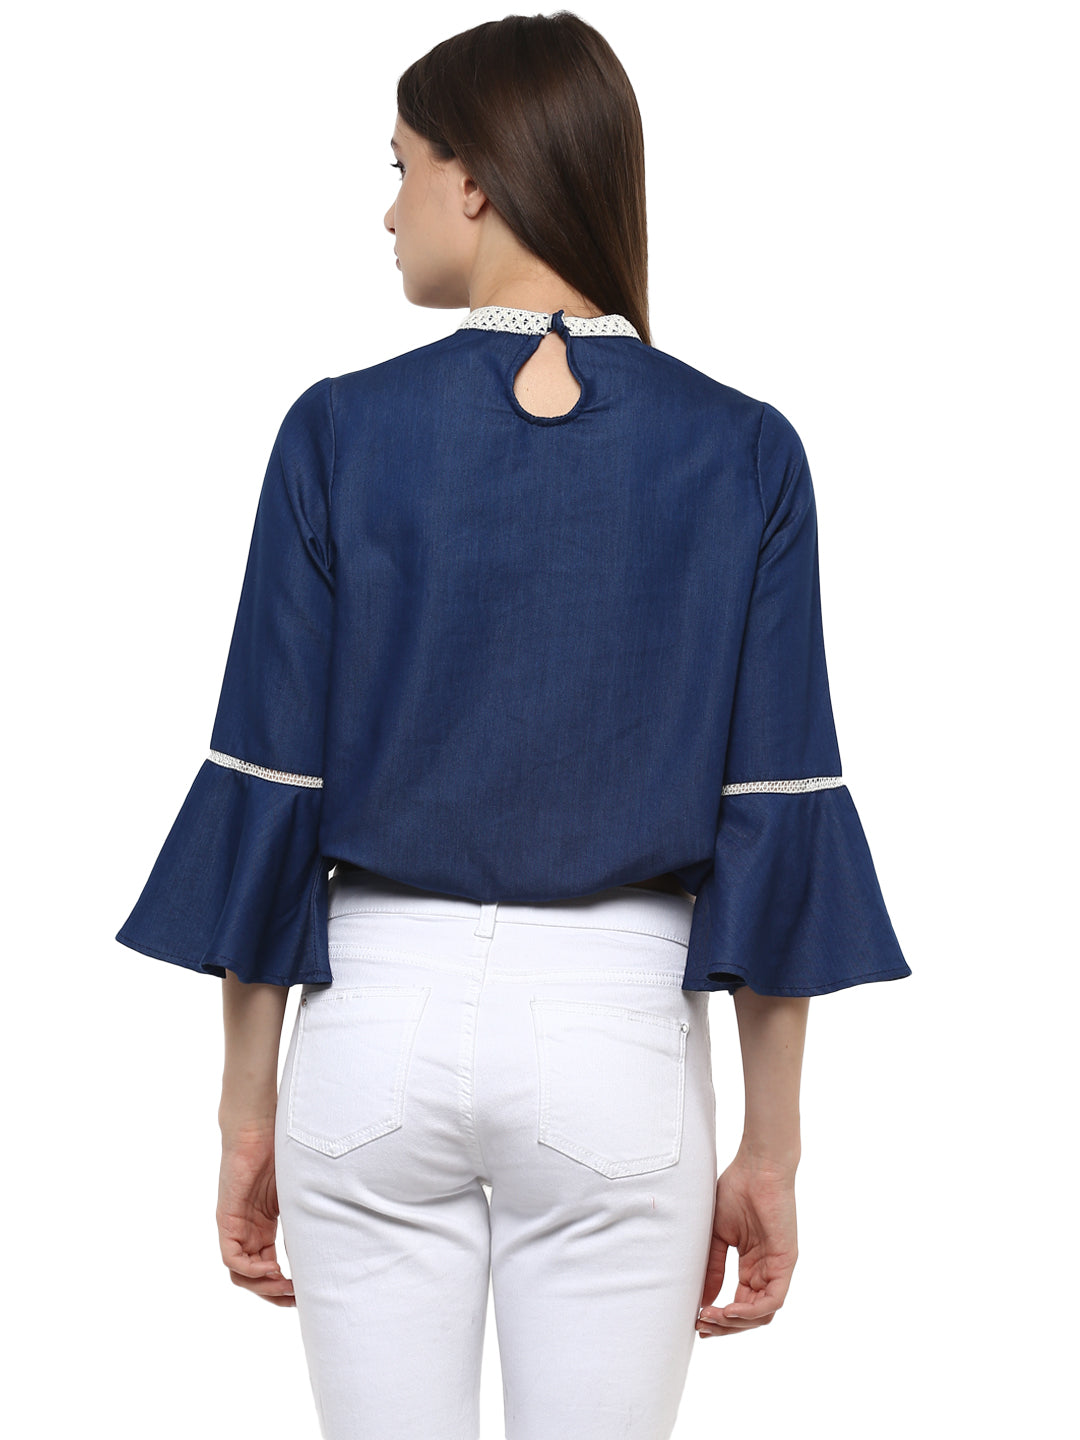 Women's  Denim peasant top with Lace detailing - StyleStone